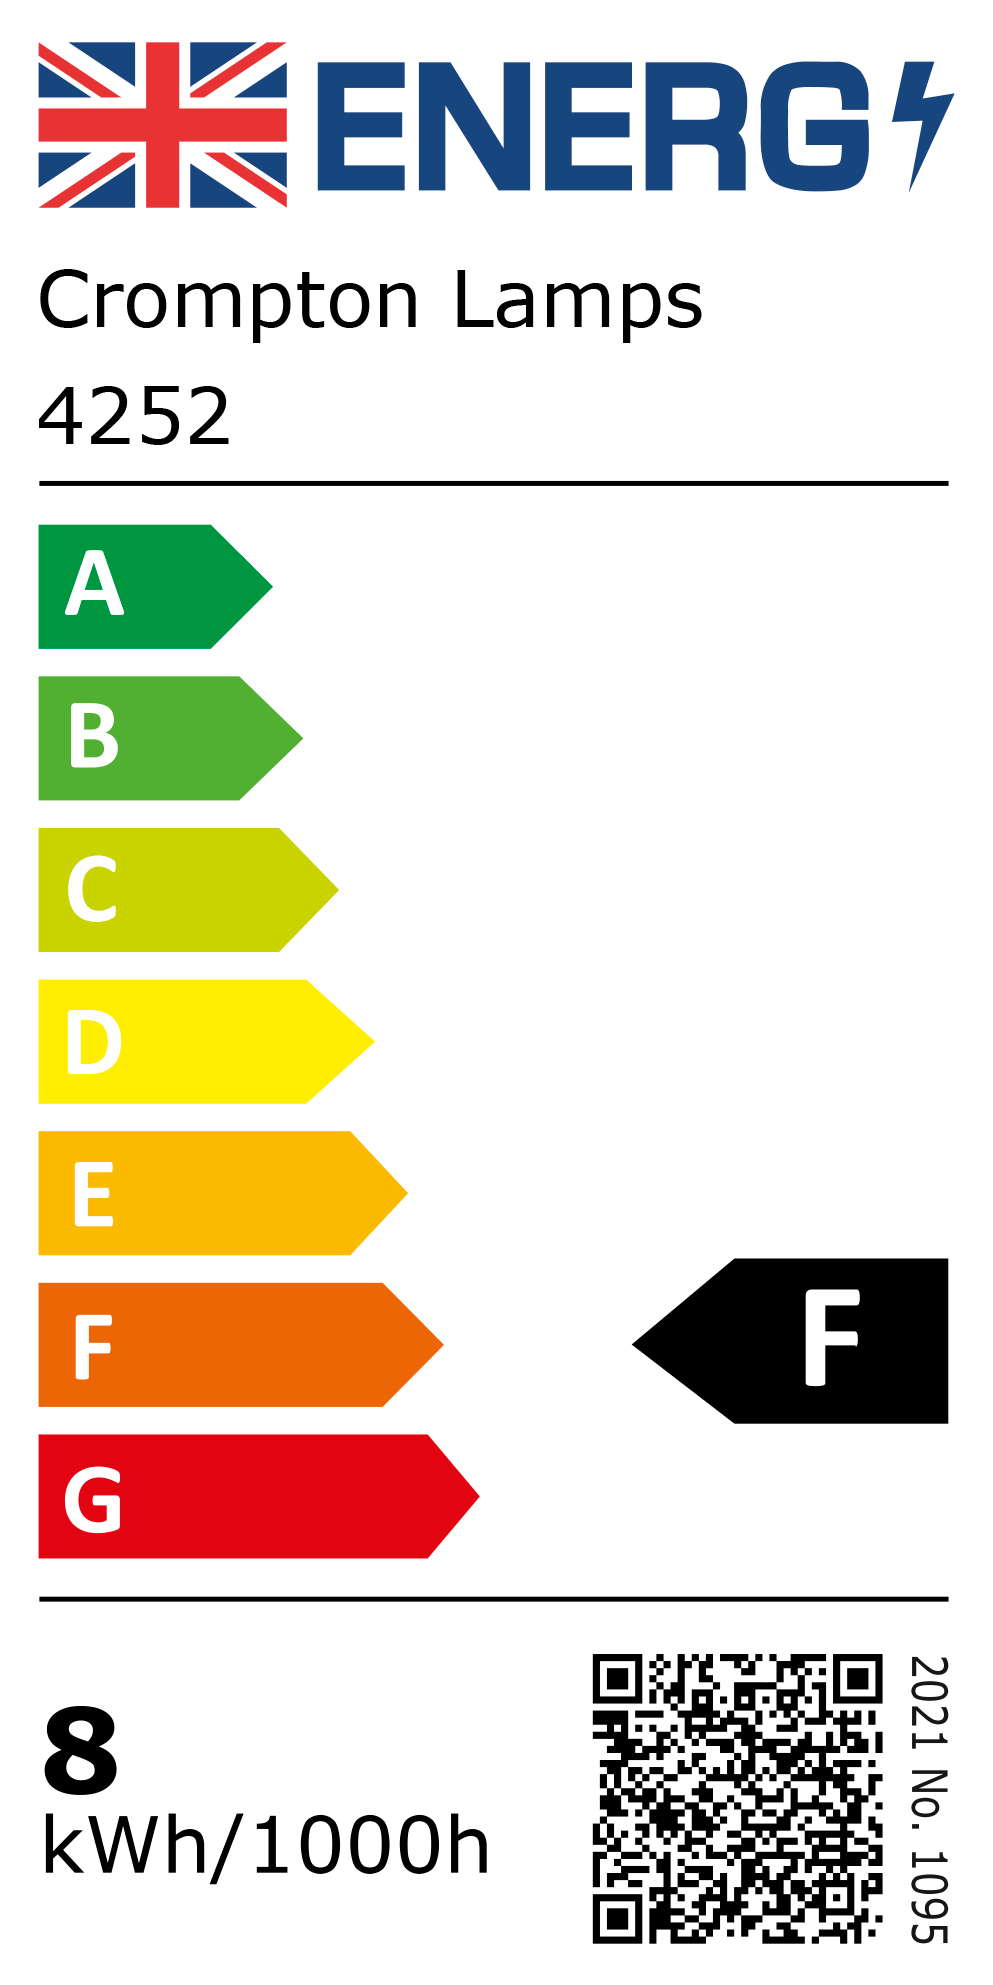 New 2021 Energy Rating Label: Stock Code 4252